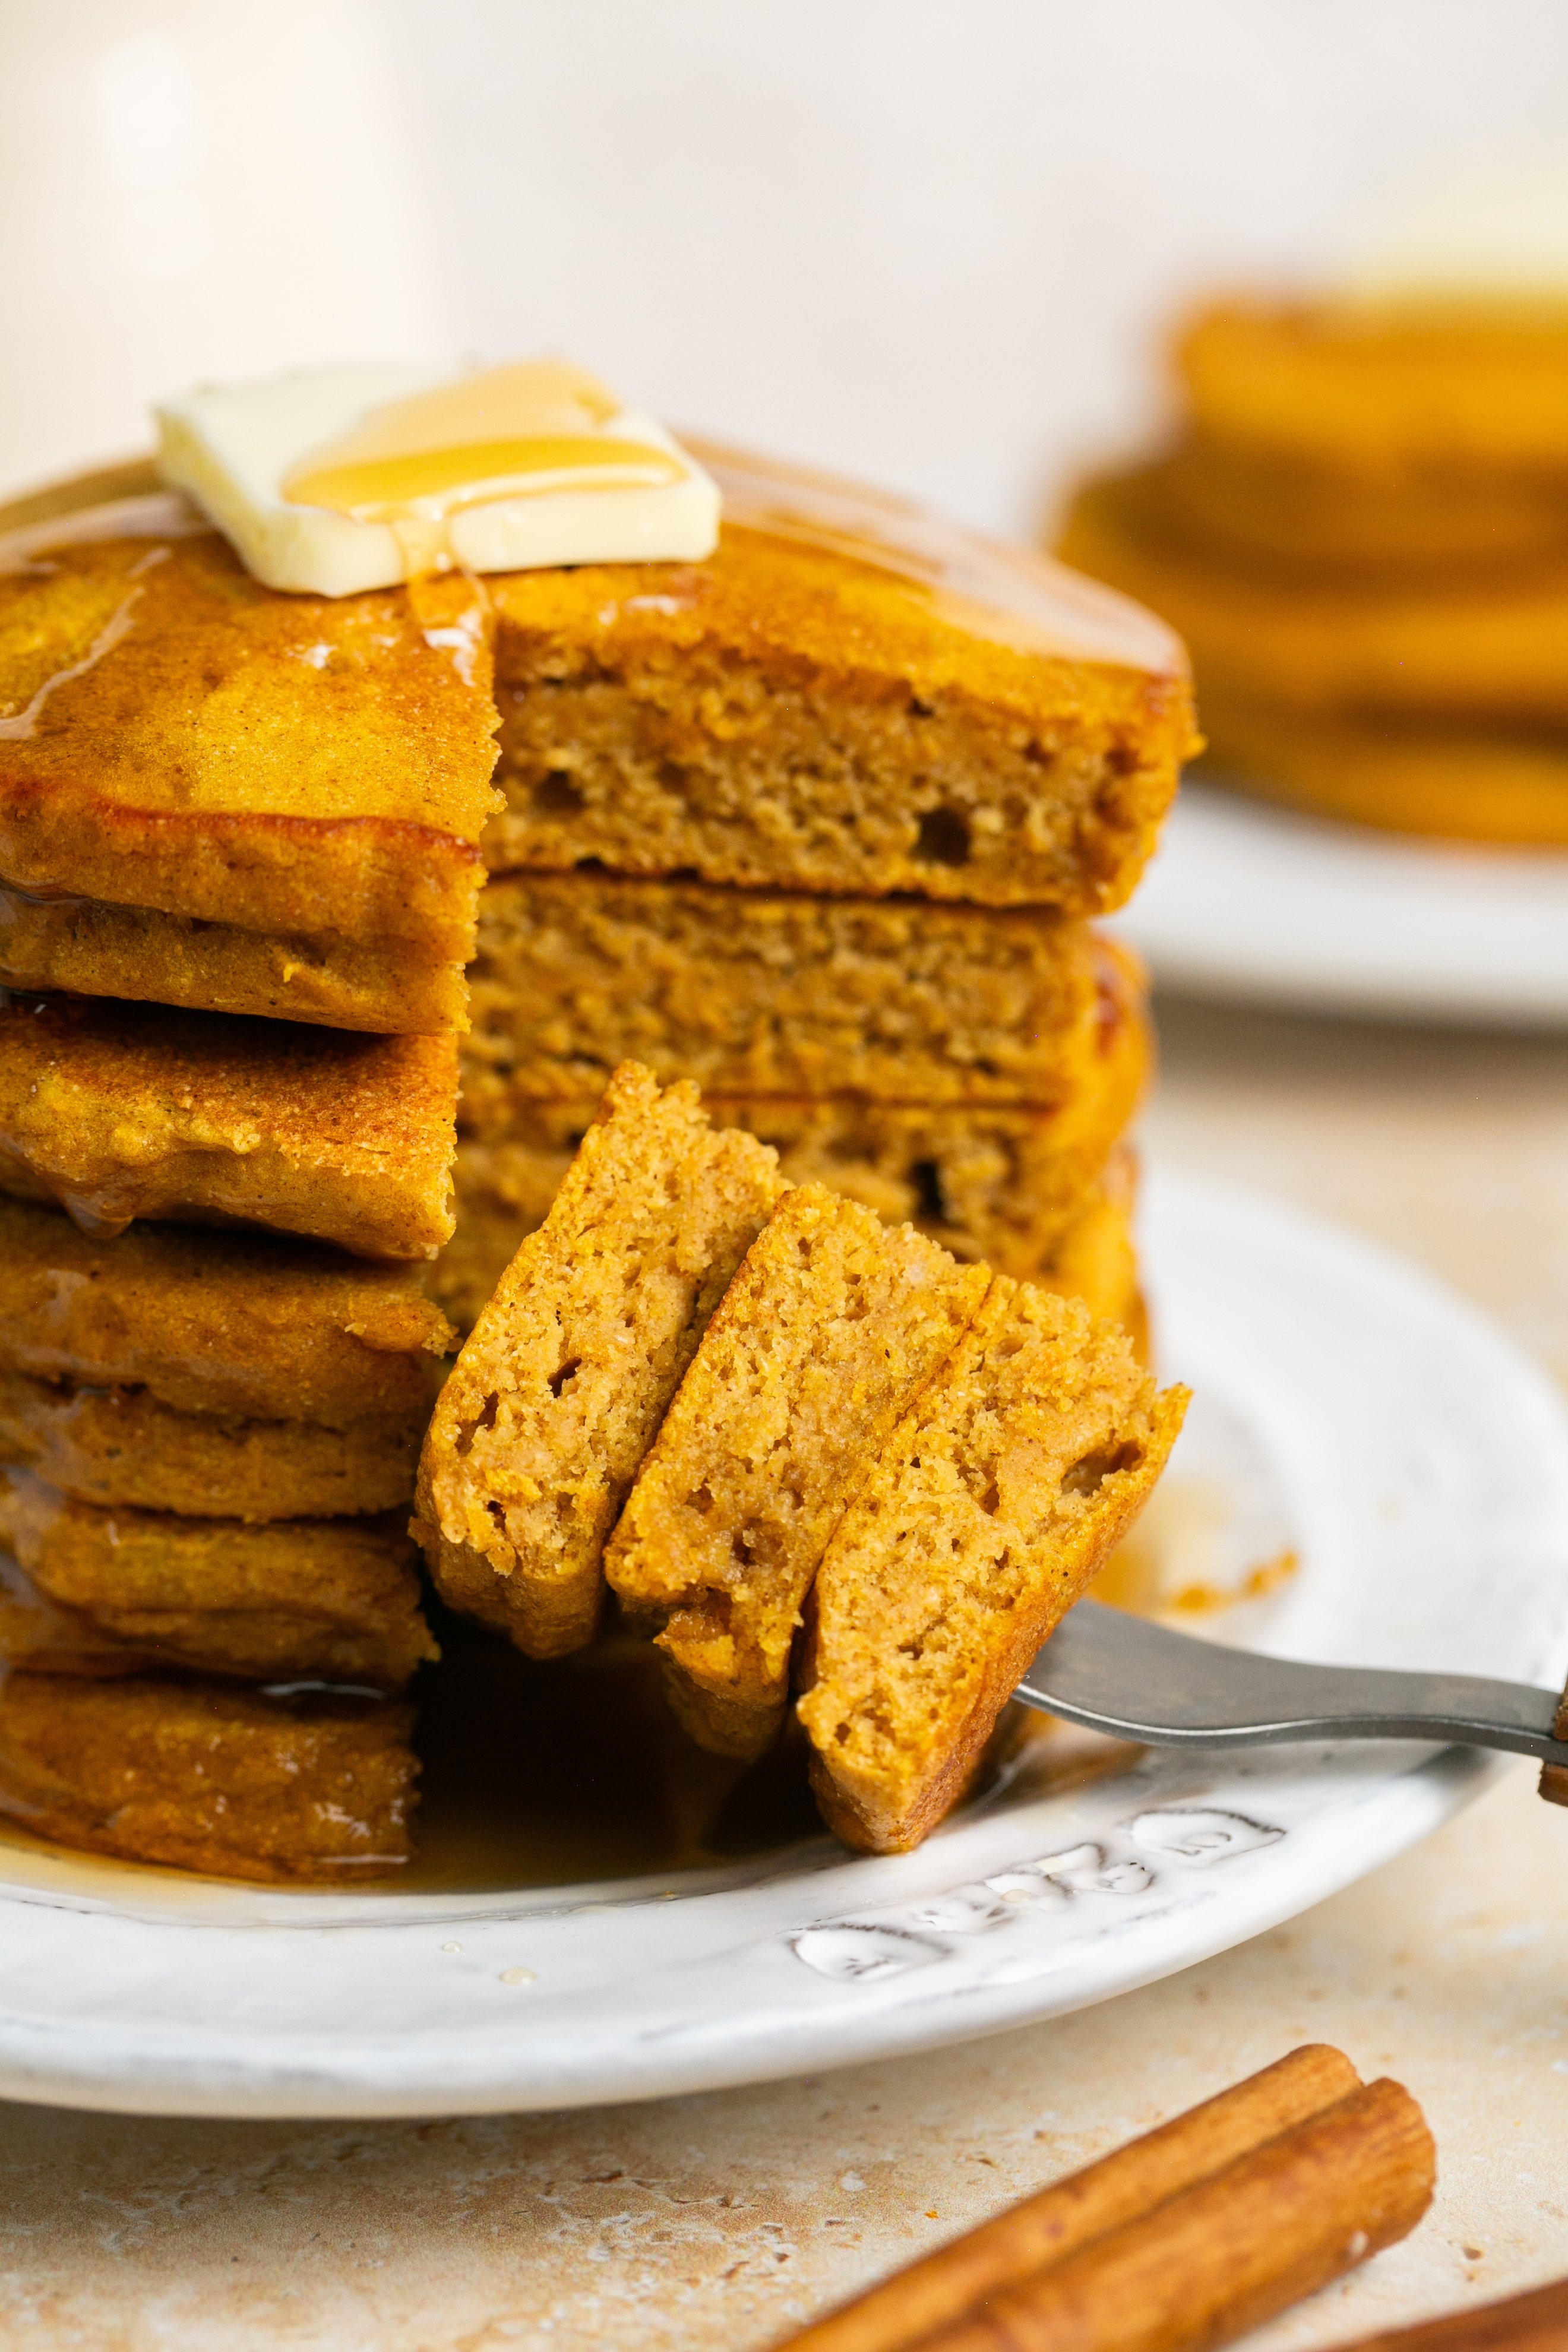 A stack of pumpkin pancakes with a slice taken out of them and on a fork on the plate. The stack is topped with a pat of butter and is drizzled with maple syrup.